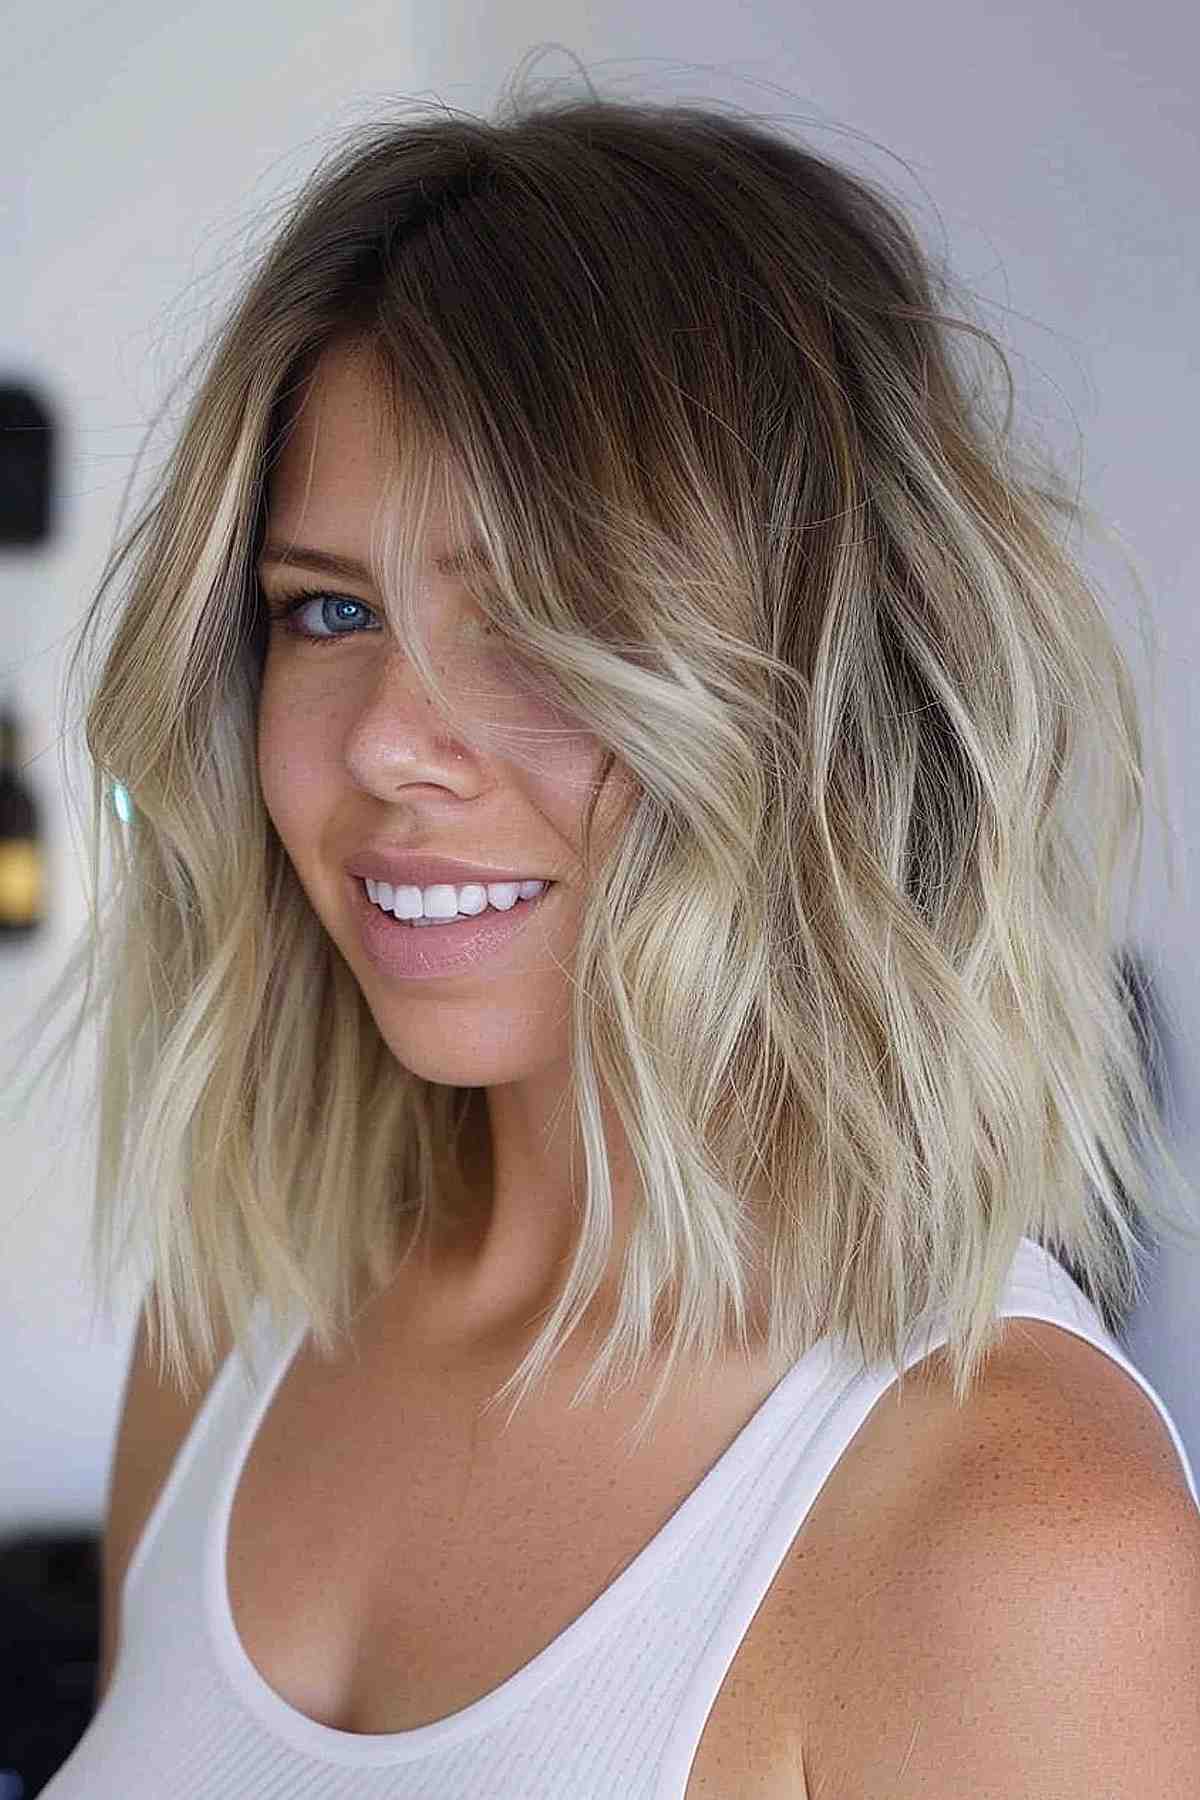 Long layered choppy bob with beachy waves and balayage from dark roots to platinum blonde tips.